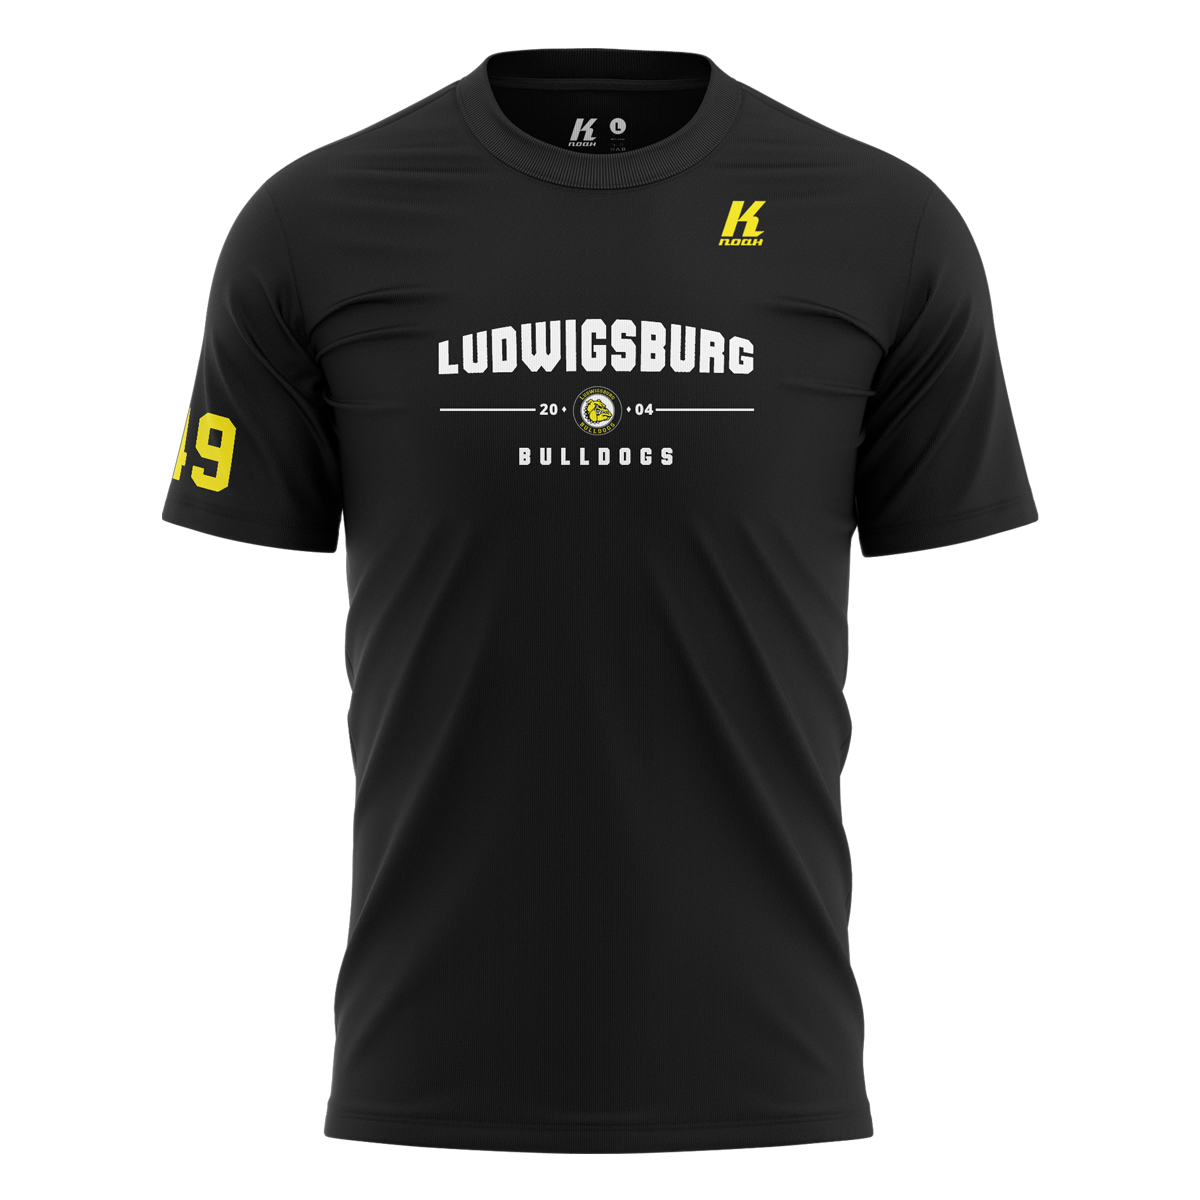 LB-Bulldogs Wordmark Tee black 190g. with Playernumber/Initials